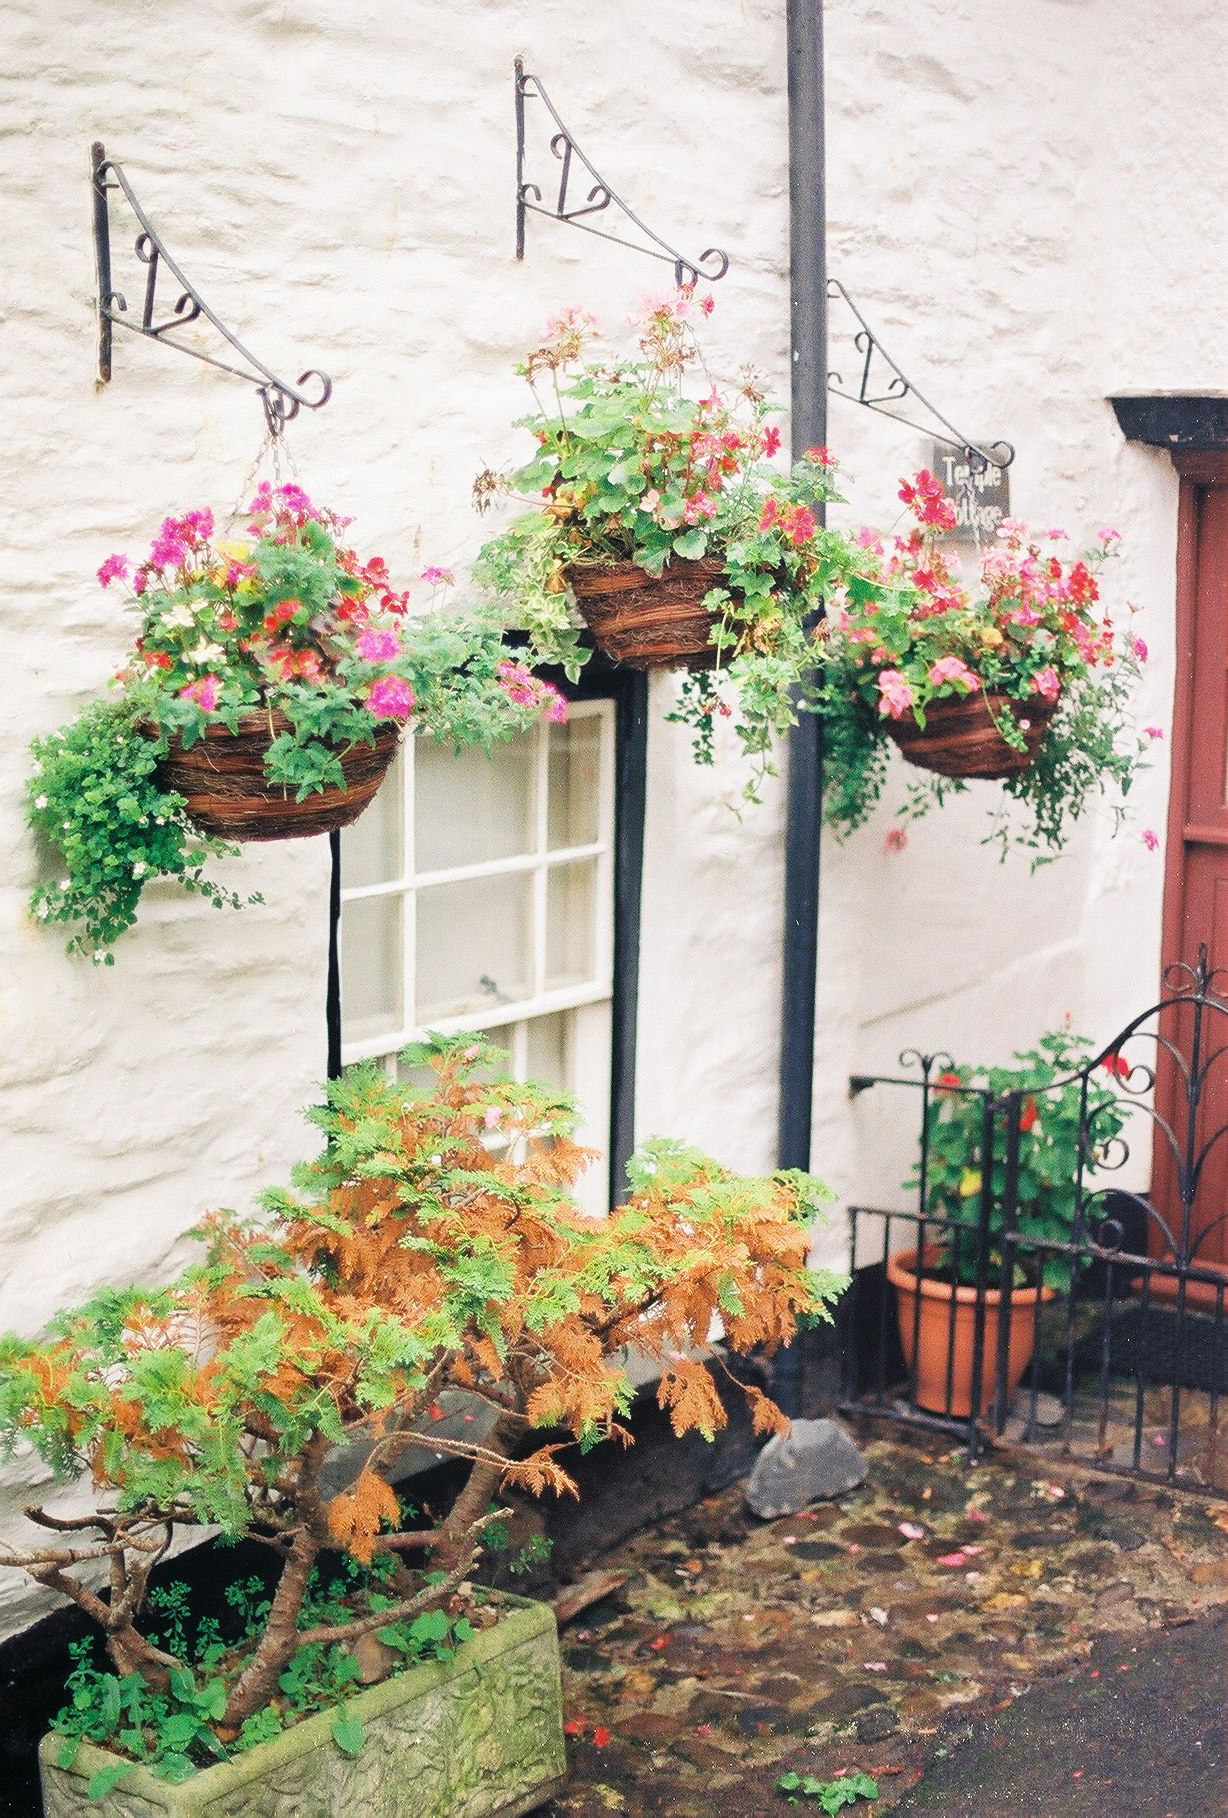 Hanging Baskets in Port Isaac England